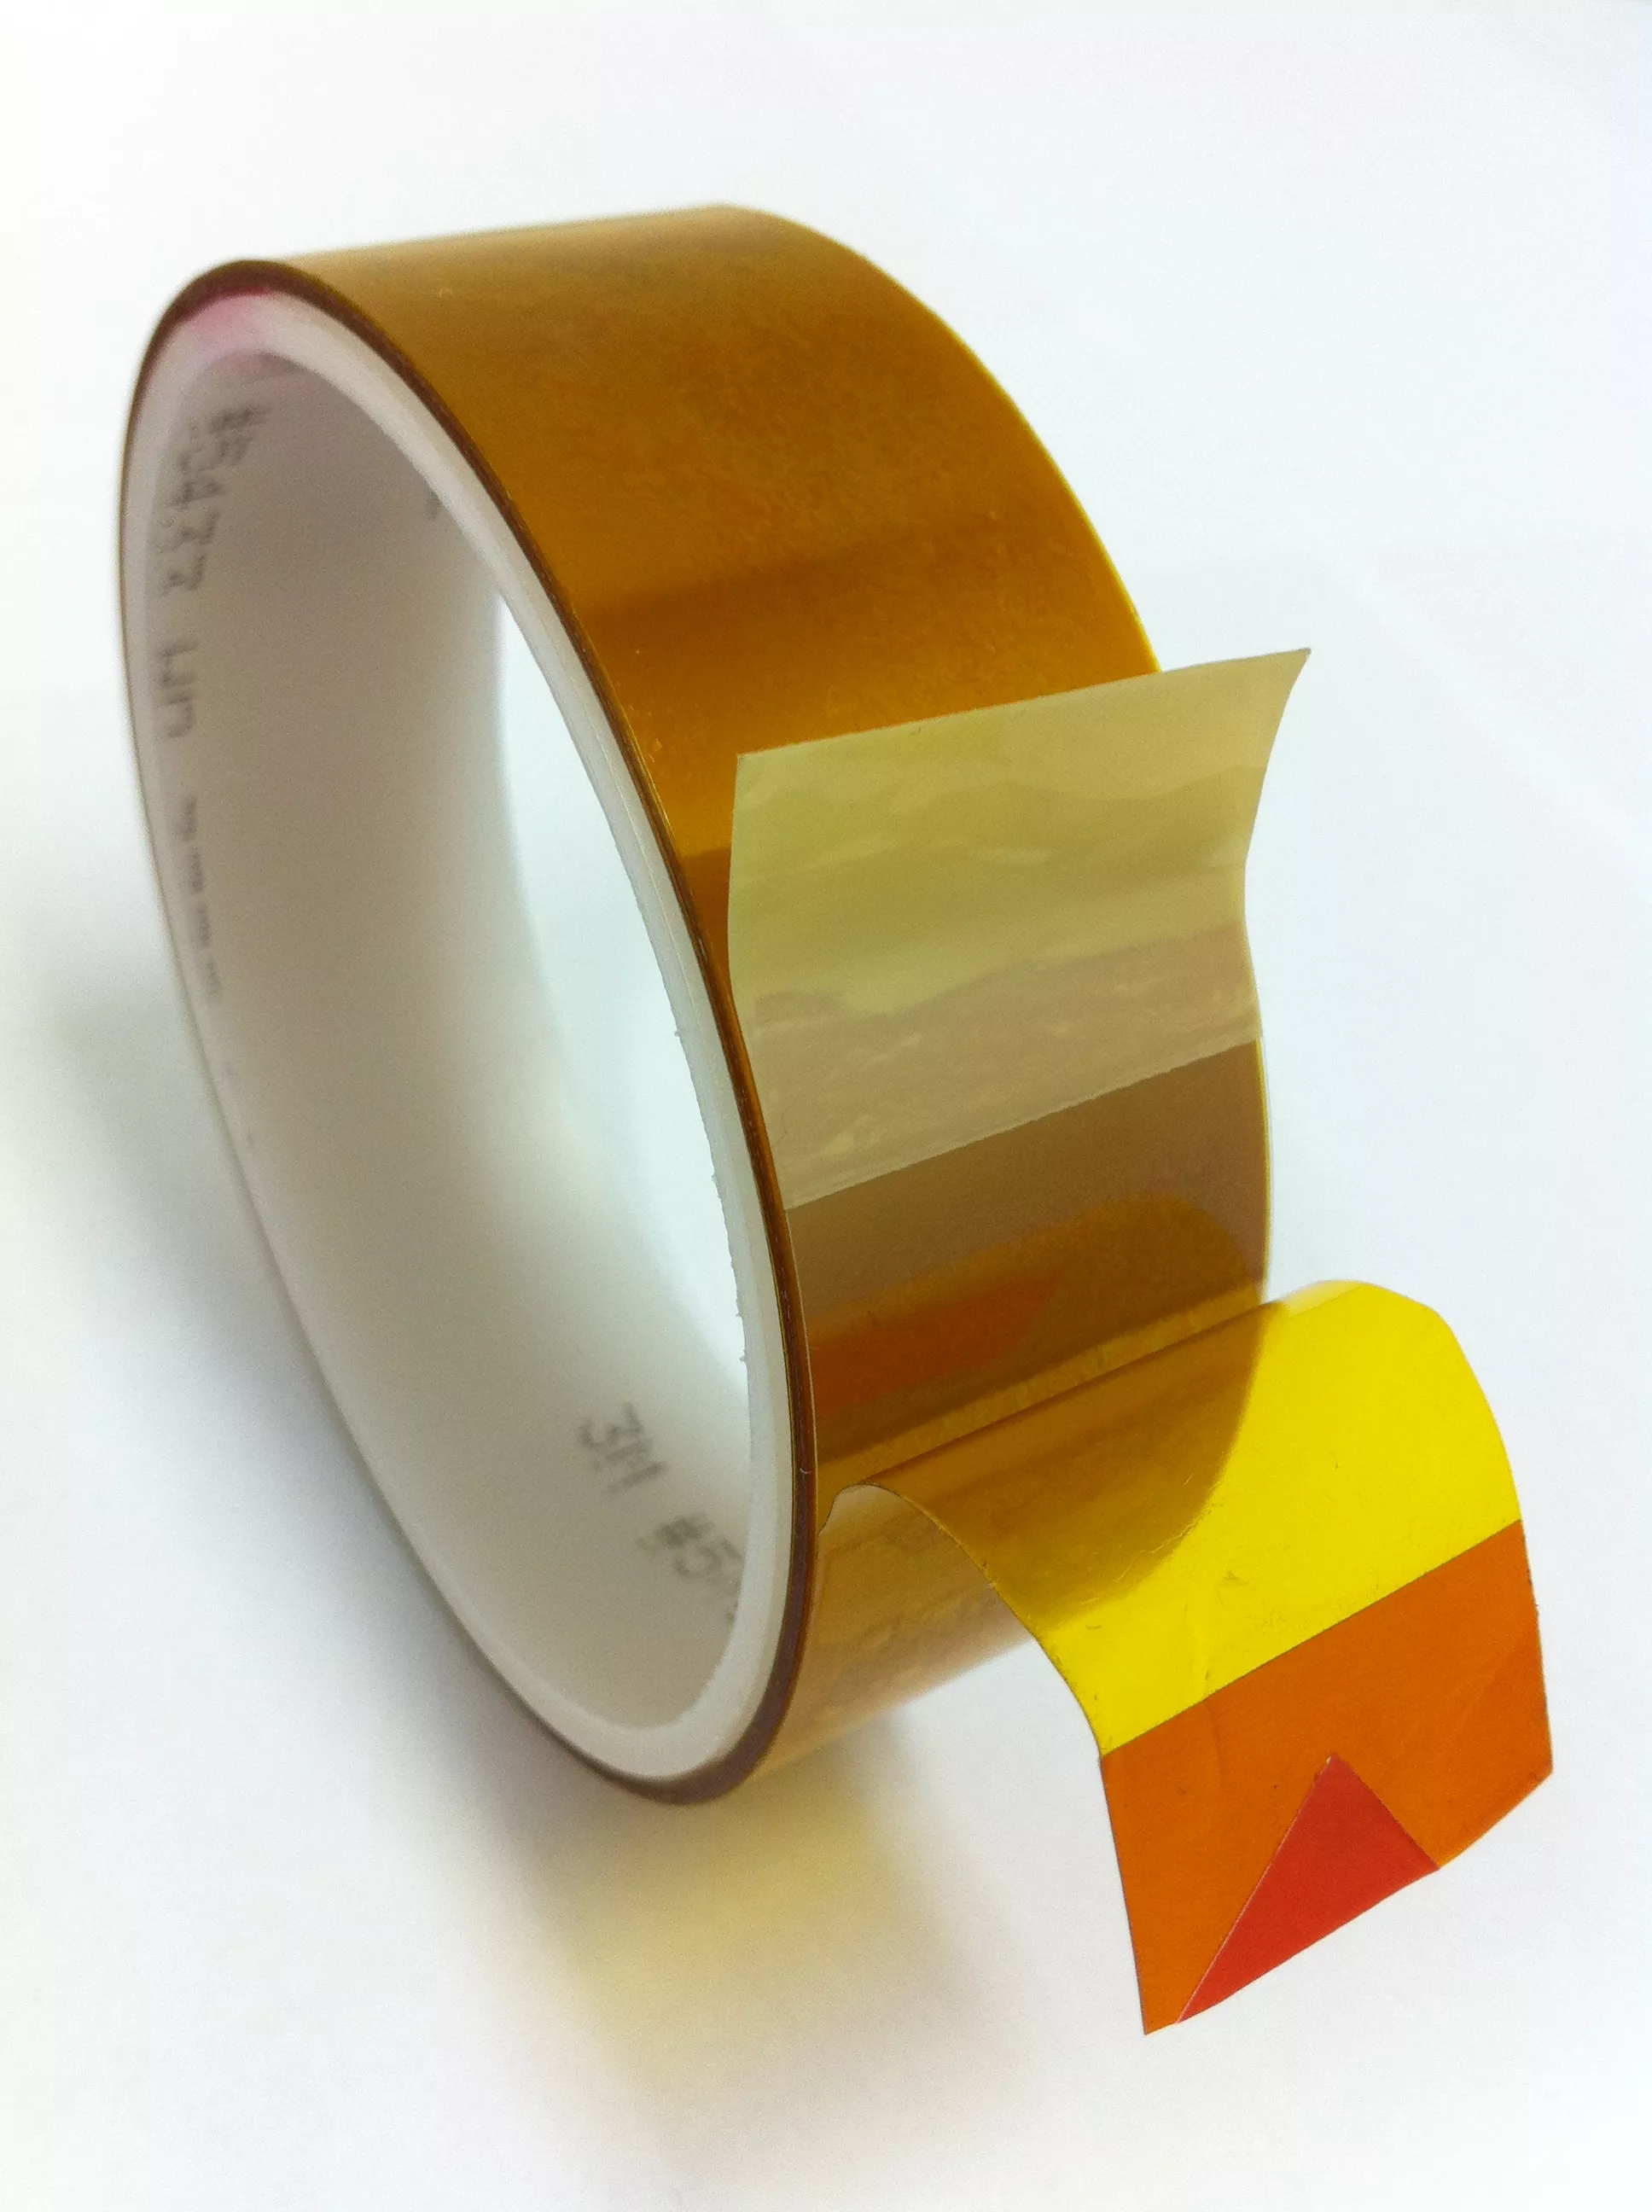 3M™ Linered Low-Static Polyimide Film Tape 5433 Amber, 12 in x 36 yds x
2.7 mil, 1/Case, Bulk